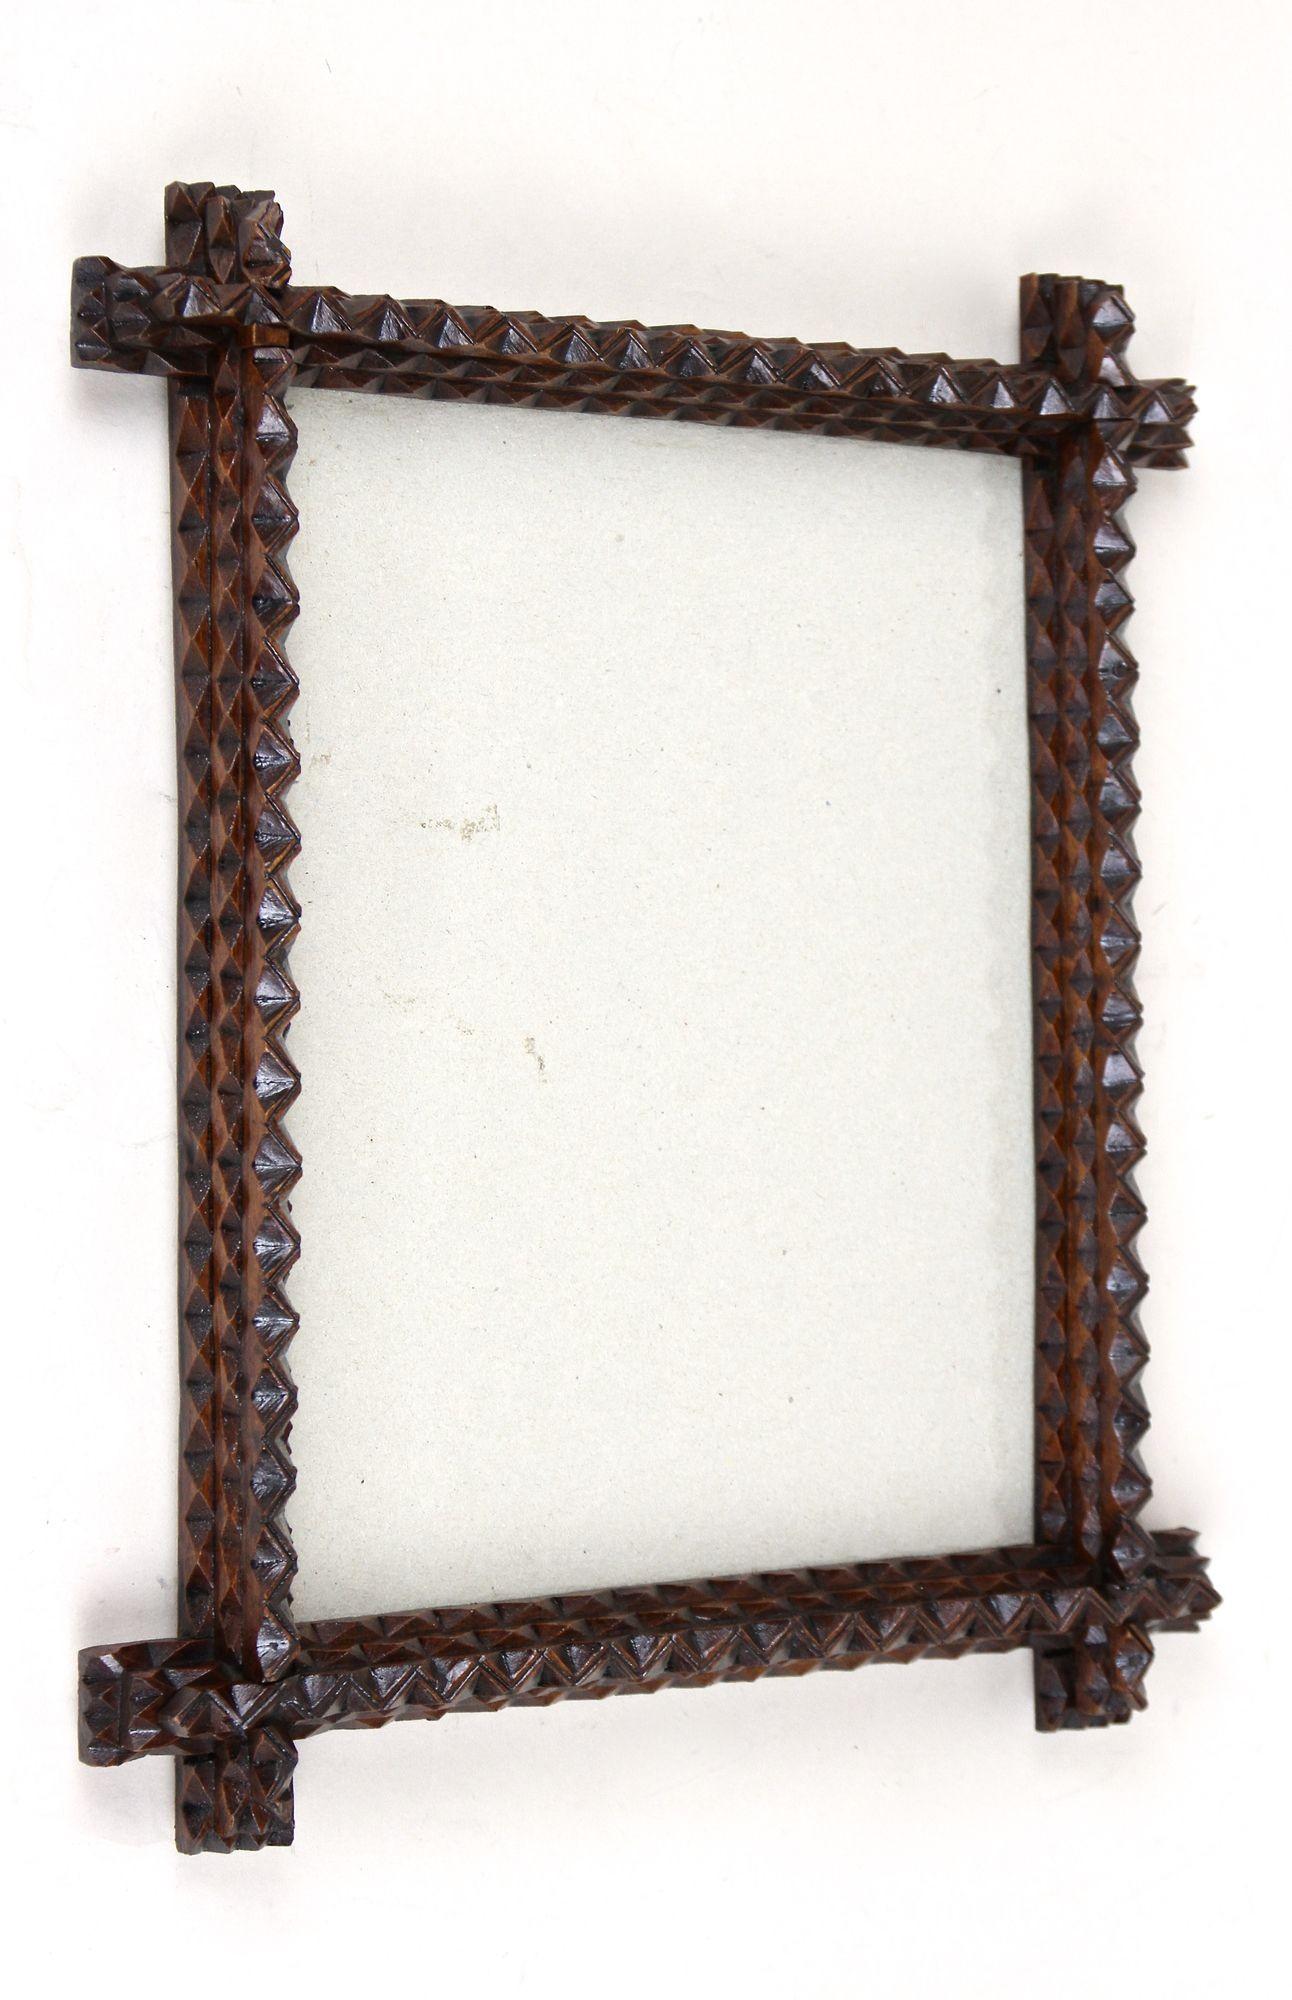 Decorative Tramp Art photo frame from the period in Austria around 1880. Elaborately hand carved out of bass wood this rustic photo frame comes with a lovely design which is reinforced by the dark brown stained surface. Holding the still original